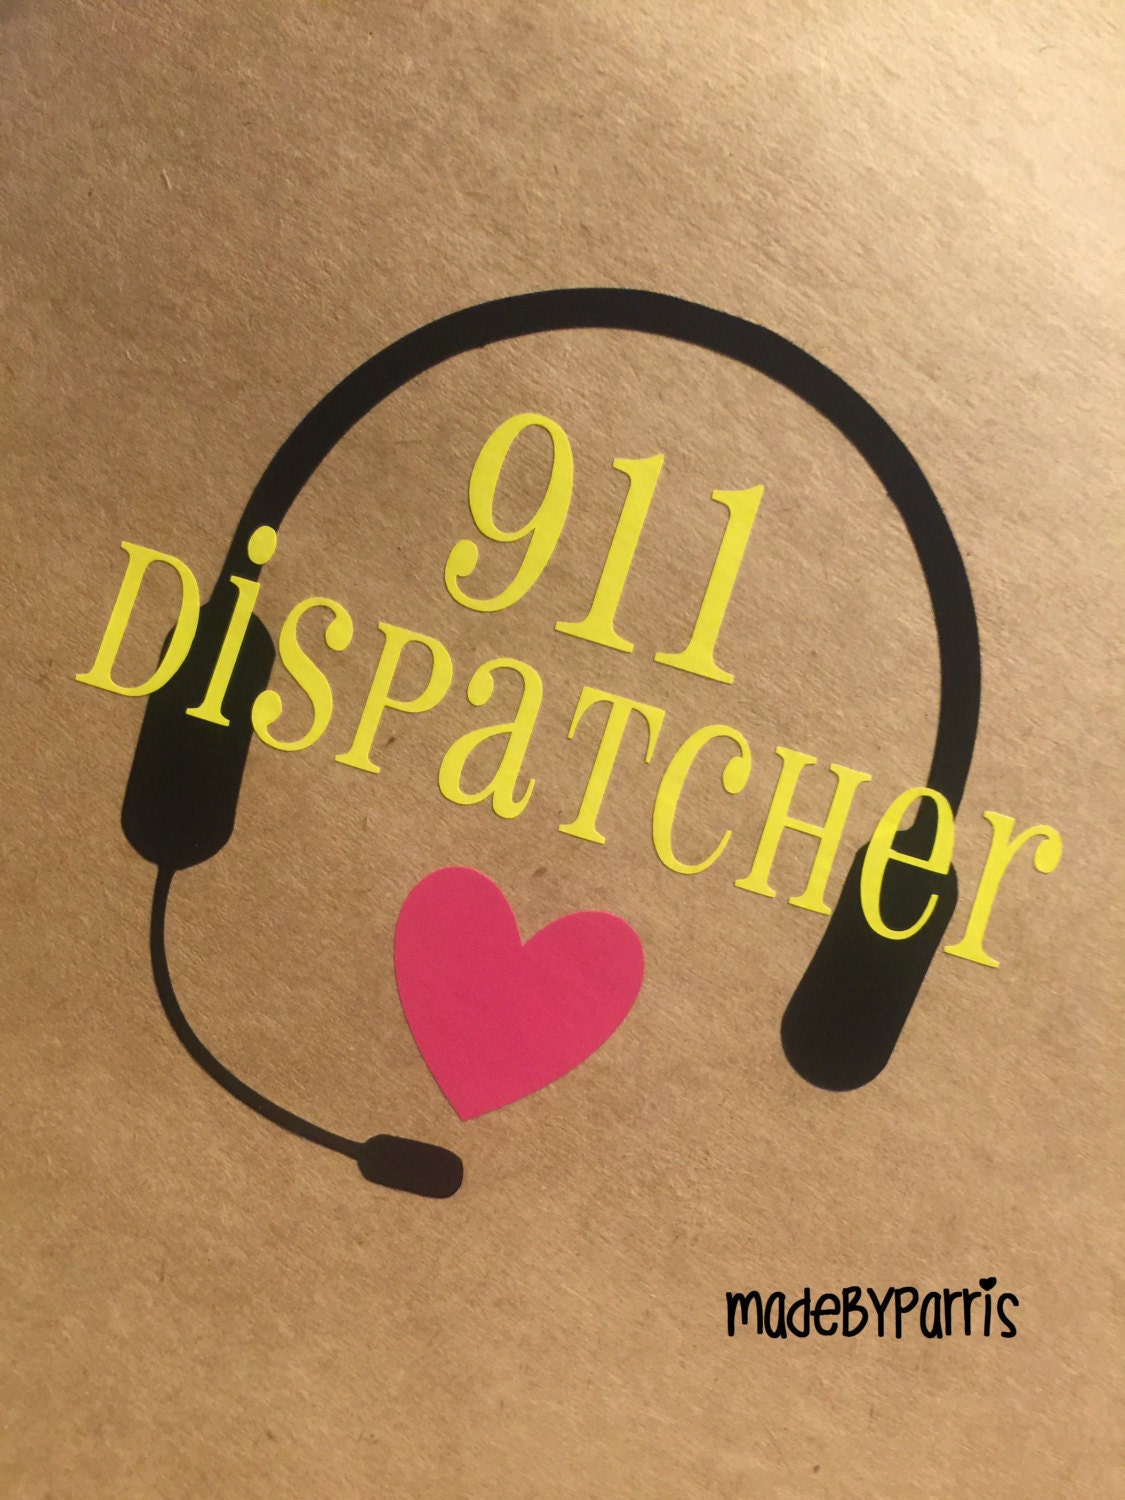 911 dispatcher headset and heartbeat svg